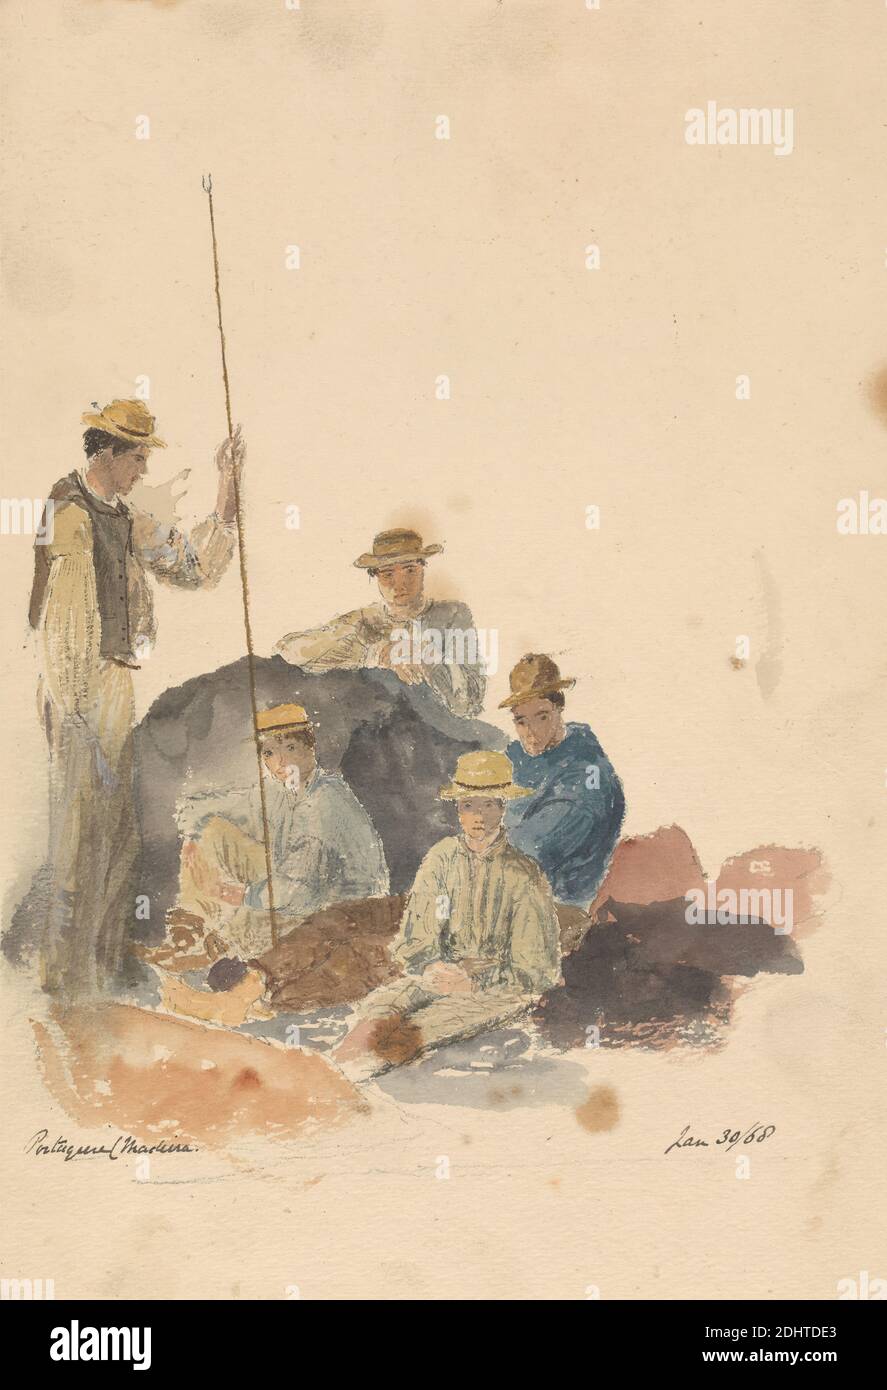 Portuguese, Madeira, Jan 30, '68, unknown artist, 1868, Watercolor and graphite on thick, moderately textured, beige wove paper, Sheet: 10 × 7 inches (25.4 × 17.8 cm), genre subject, hats, men, Portuguese Stock Photo